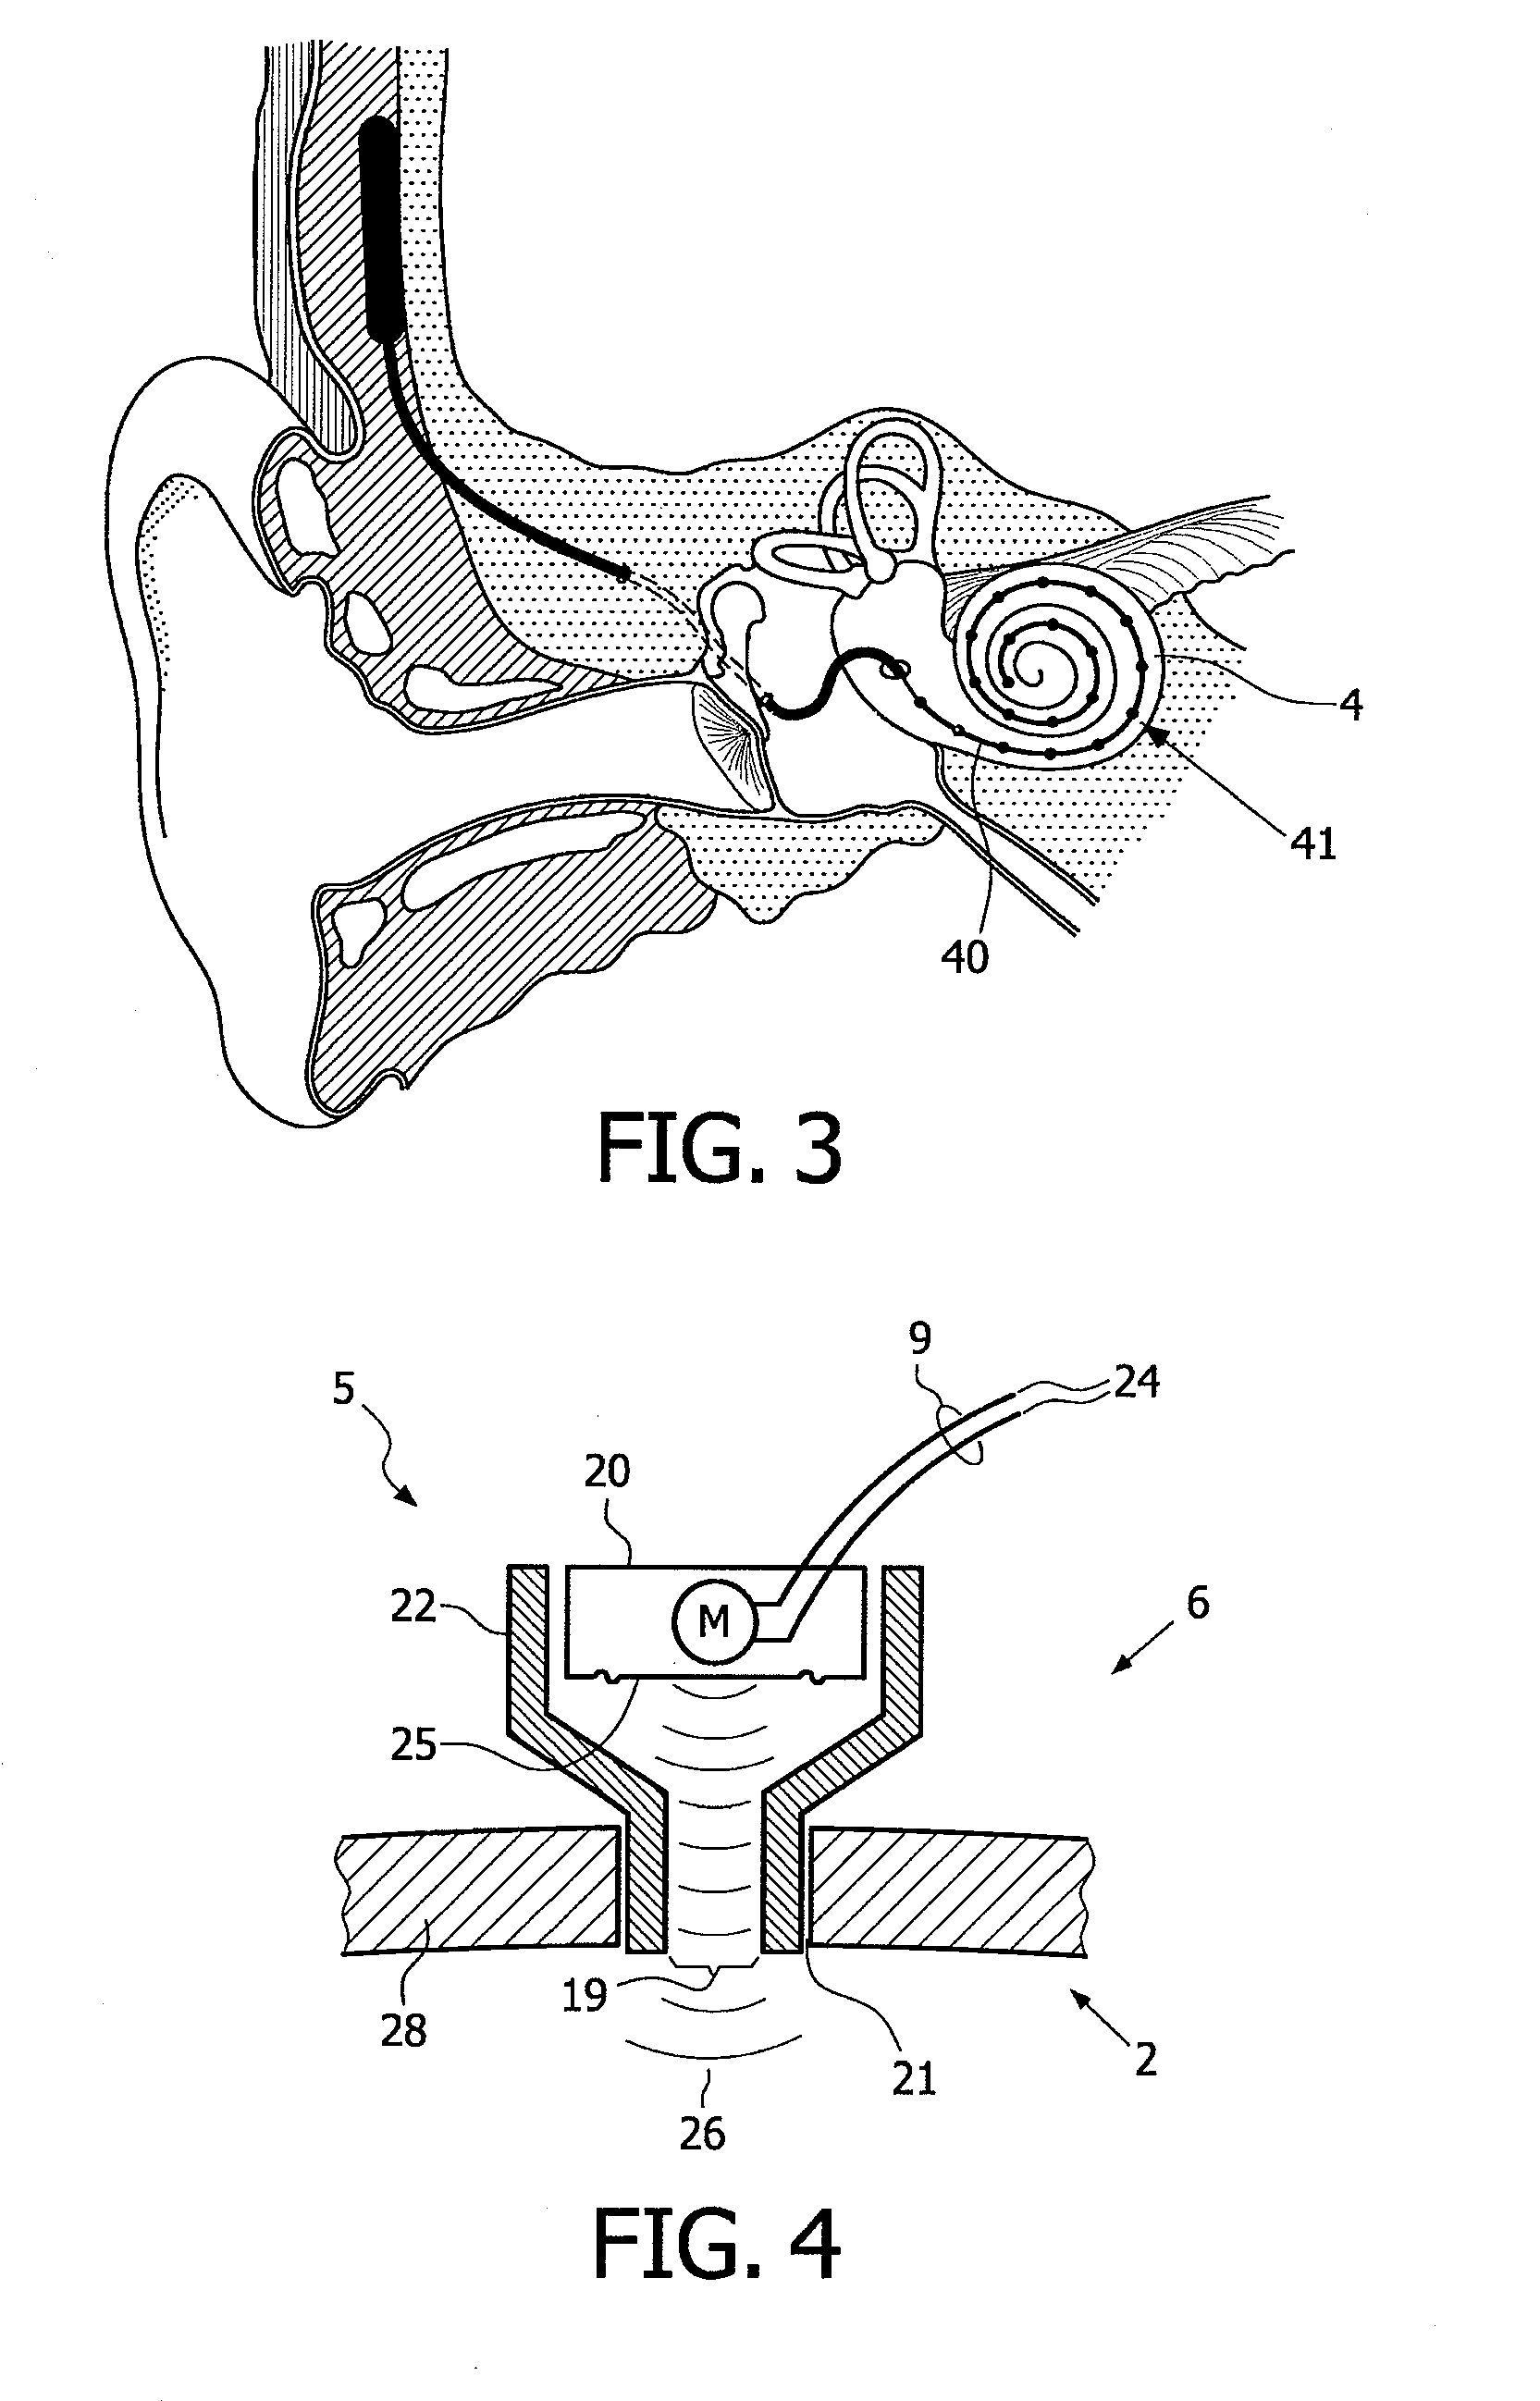 Device and method for improving hearing